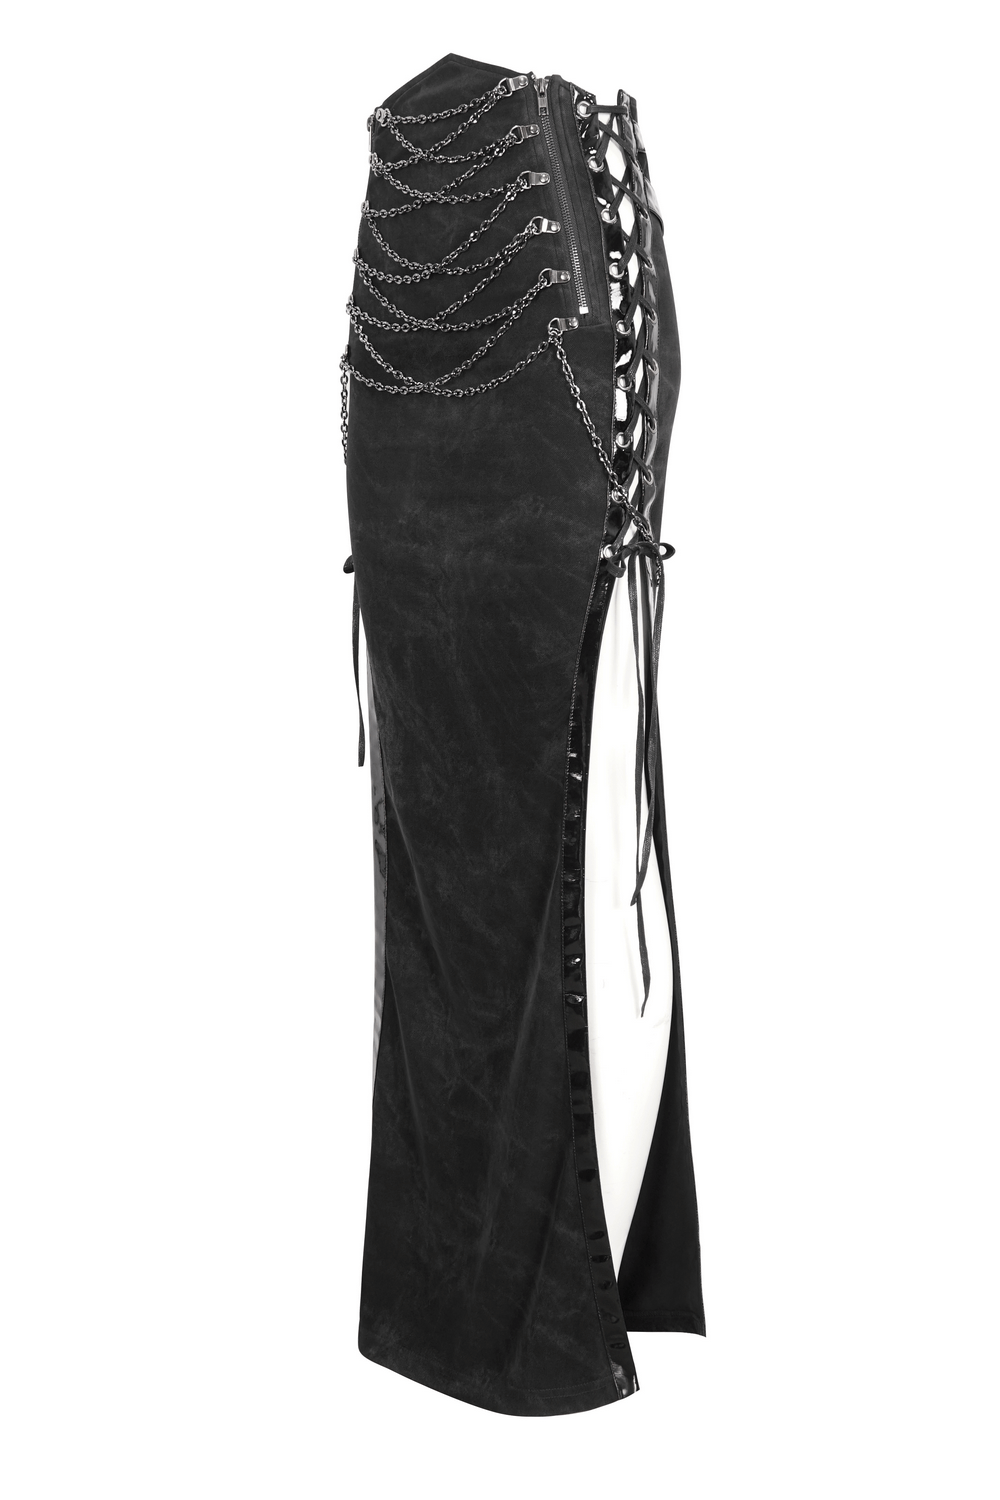 Sleek Black Maxi Skirt with Sides Lacing Details